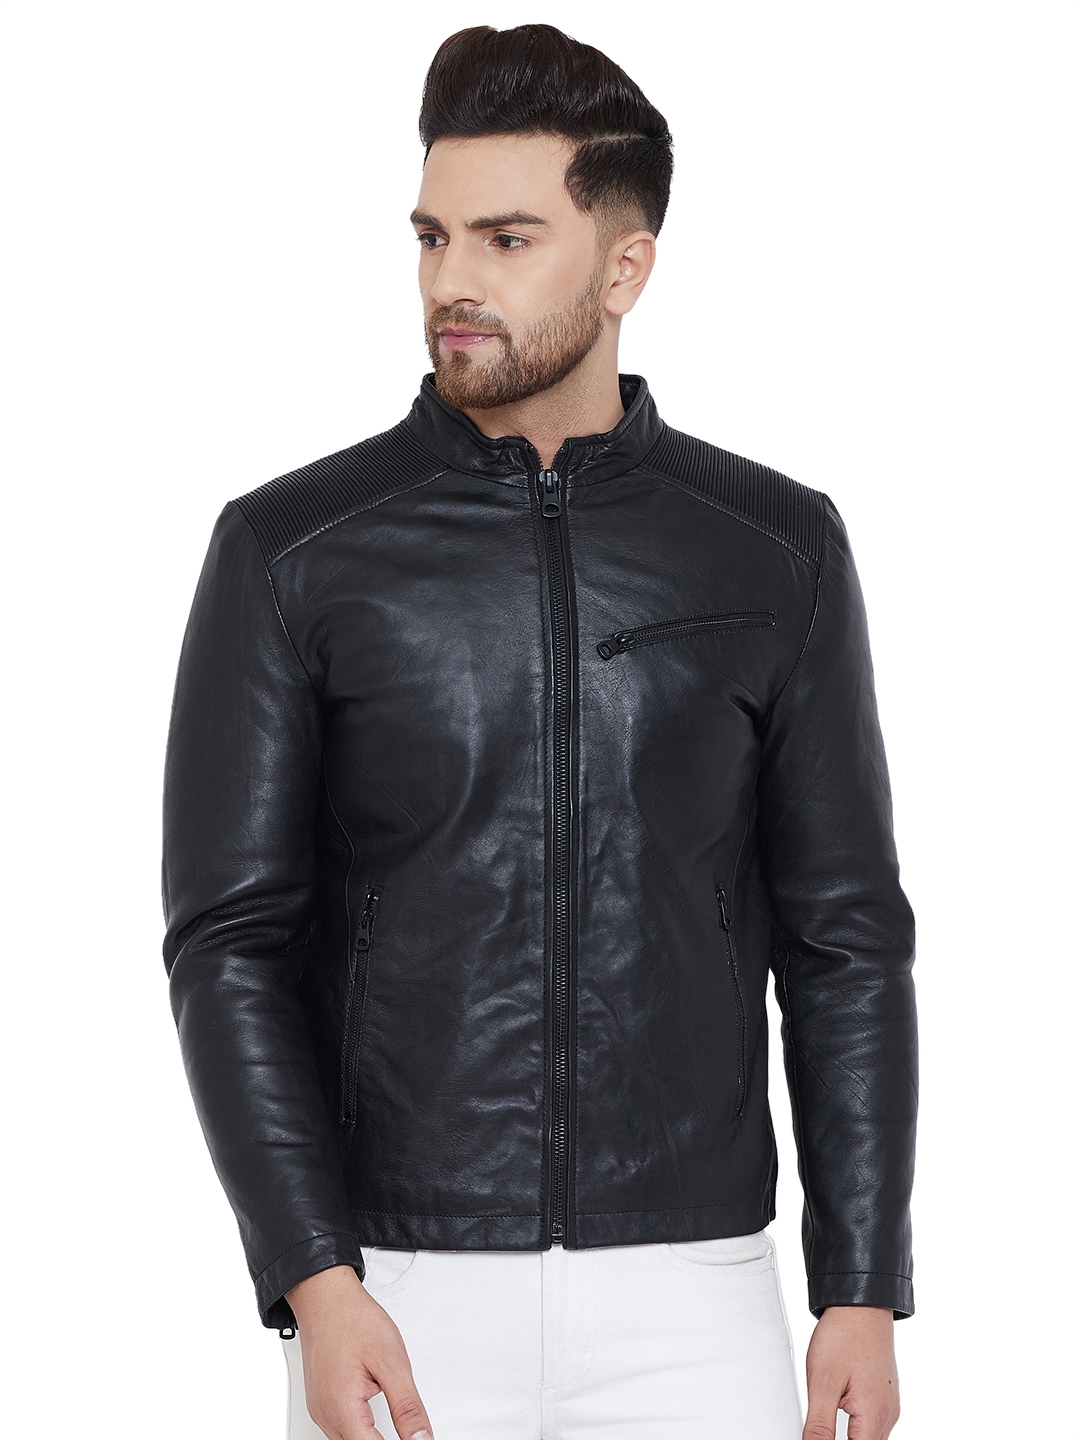 Justanned | Justanned Men Genuine Real Leather Jacket